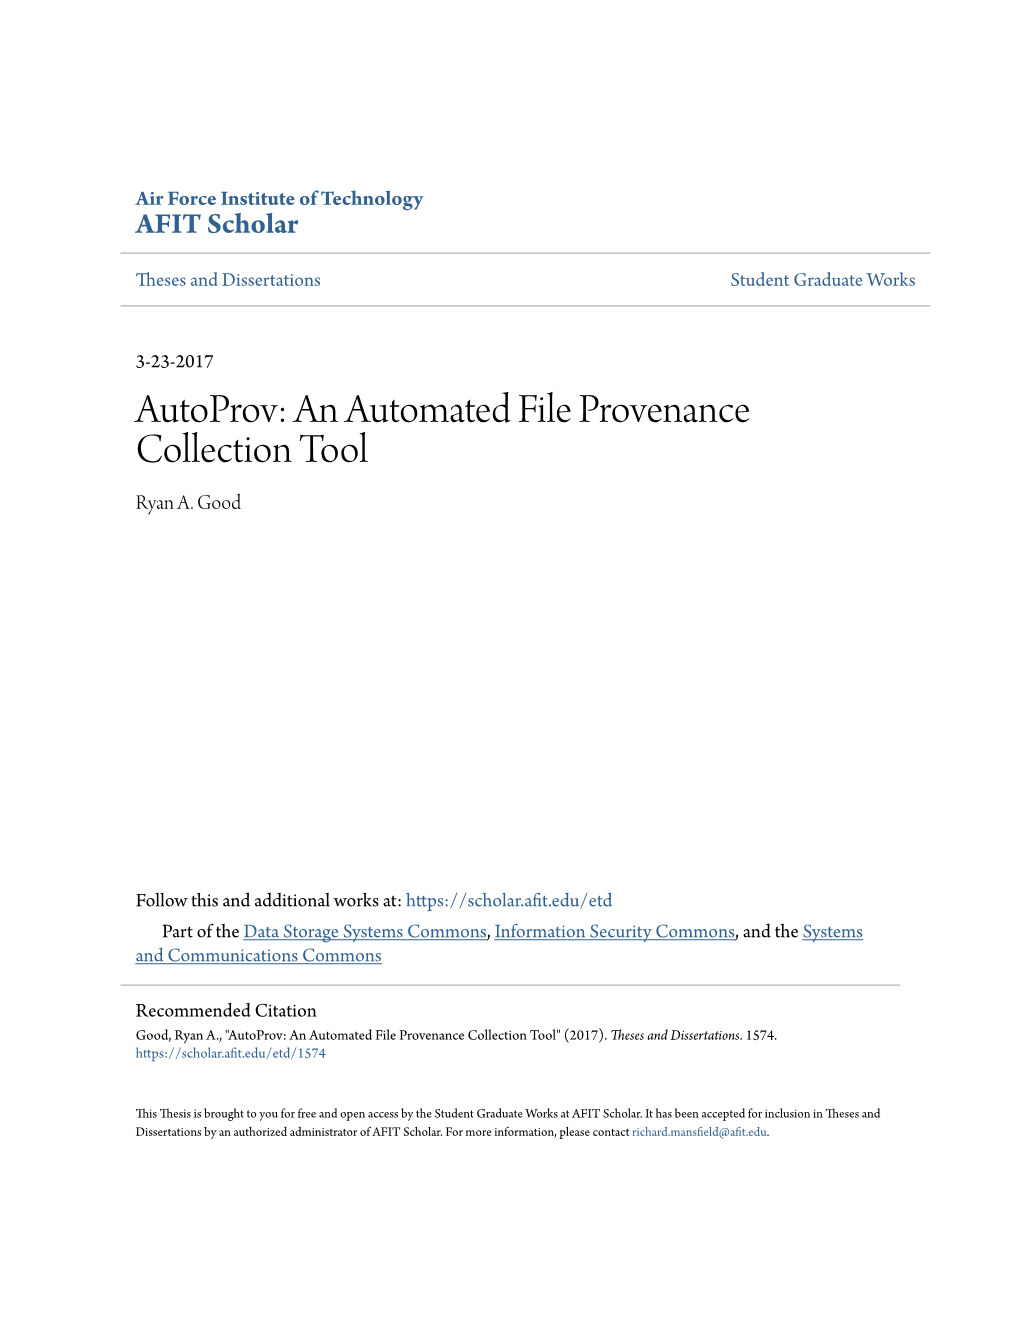 Autoprov: an Automated File Provenance Collection Tool Ryan A